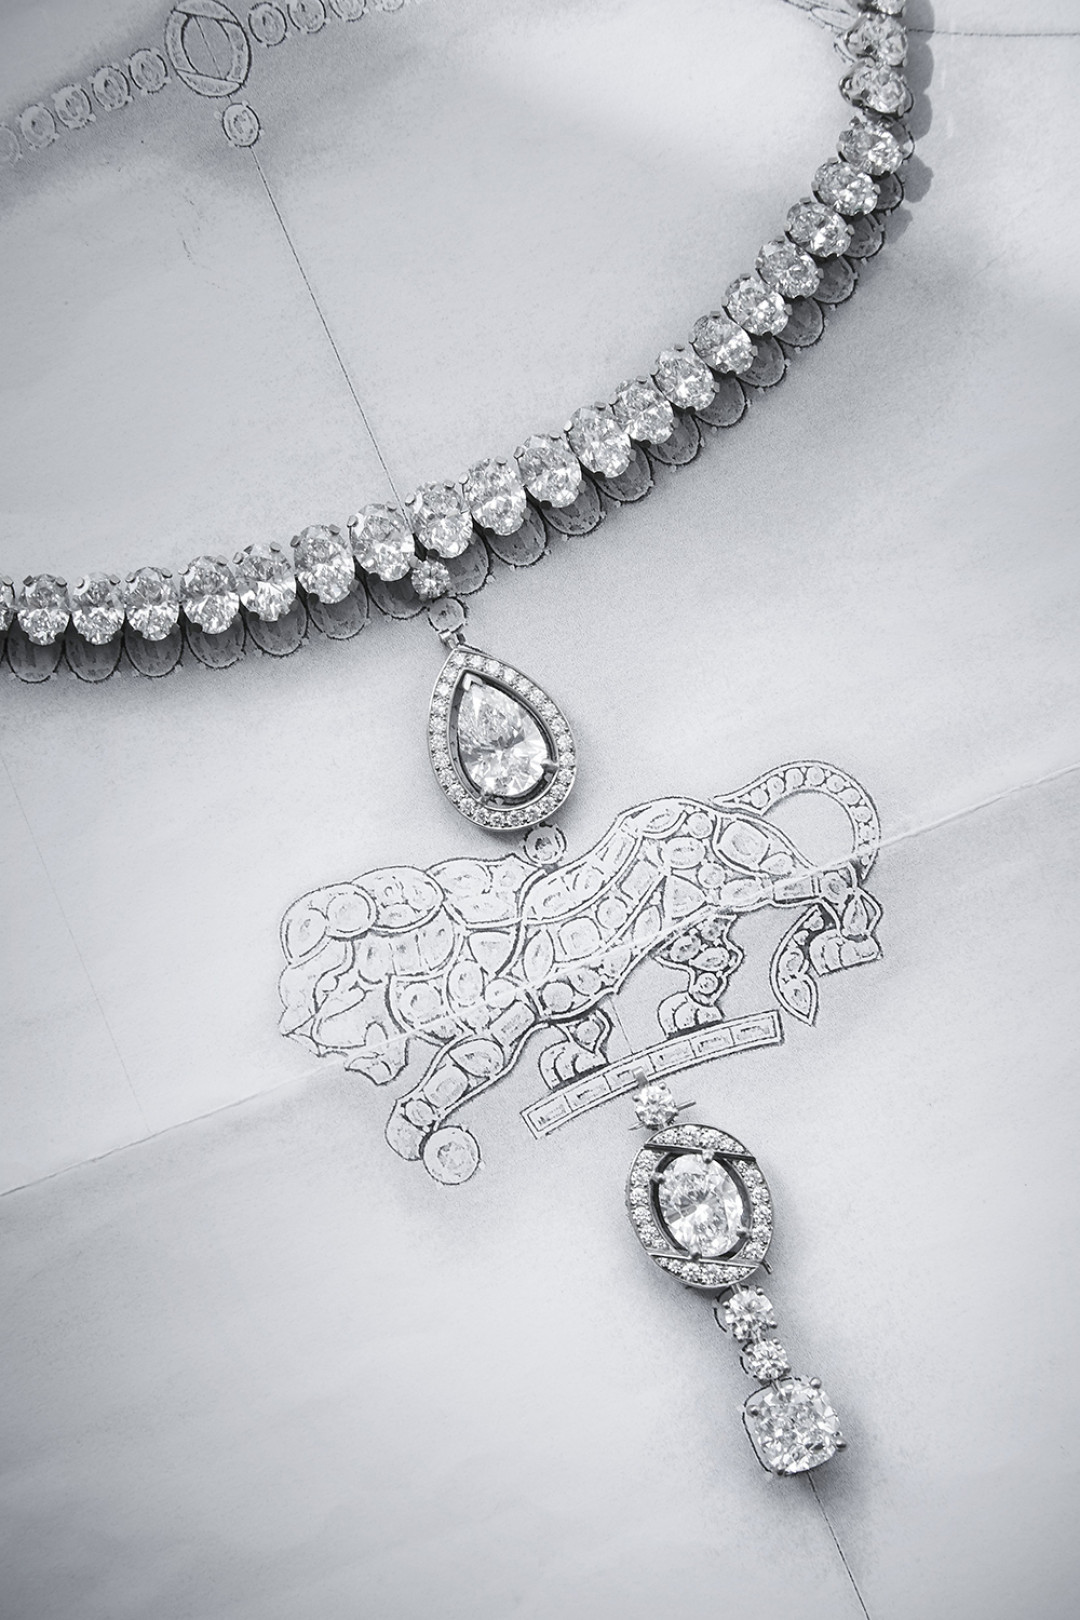 Work on the pieces from the L'ESPRIT DU LION High Jewelry collection in the CHANEL workshop, 18 Place Vendôme, Paris - Work on the oval-cut diamonds for the bezels on the necklace.